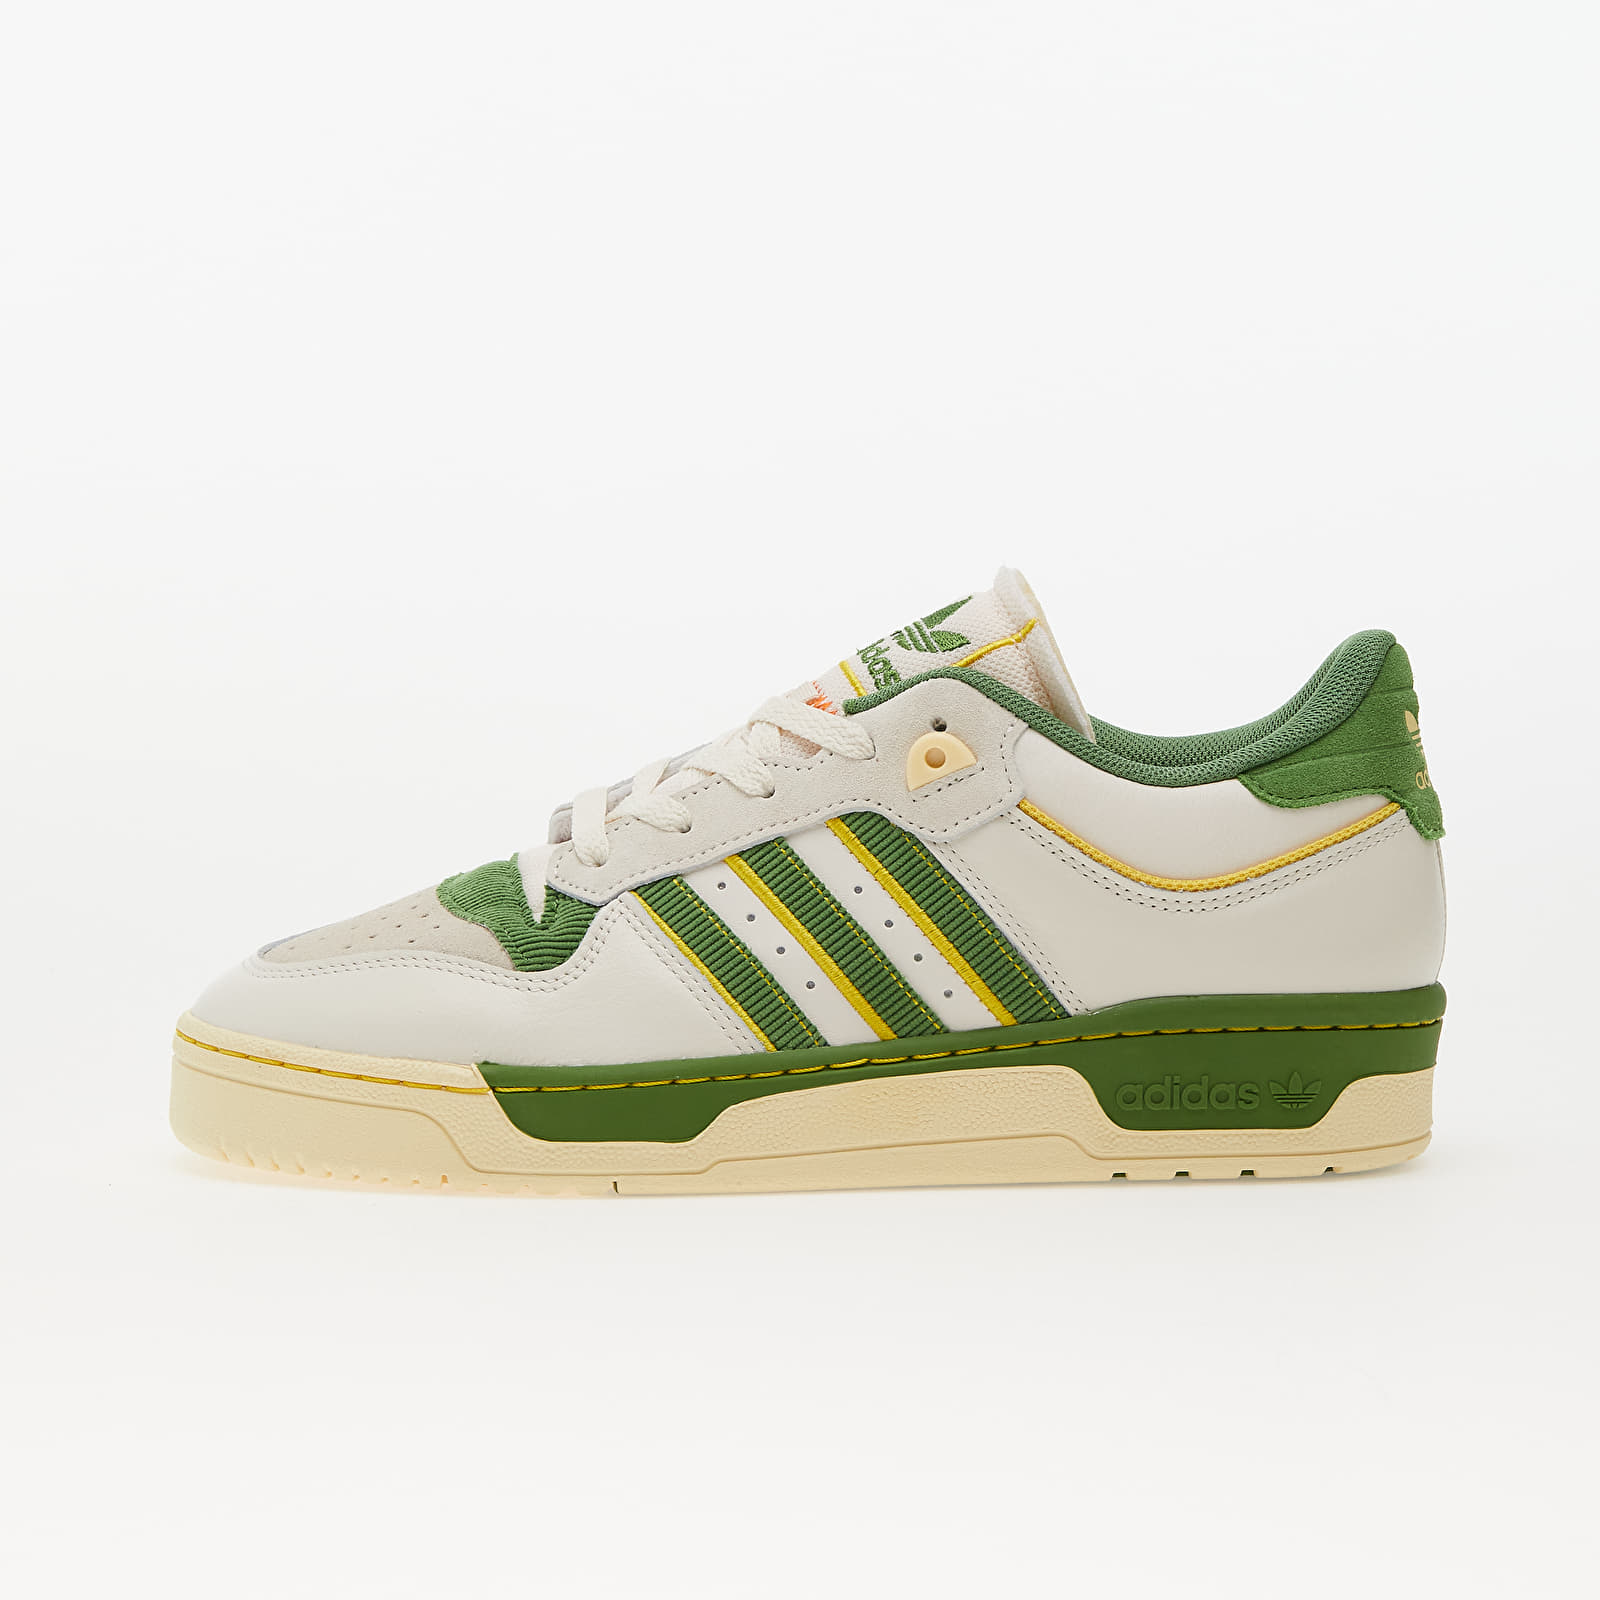 Chaussures et baskets homme adidas Rivalry Low 86 Core White/ CREGRN/ HAZYEL